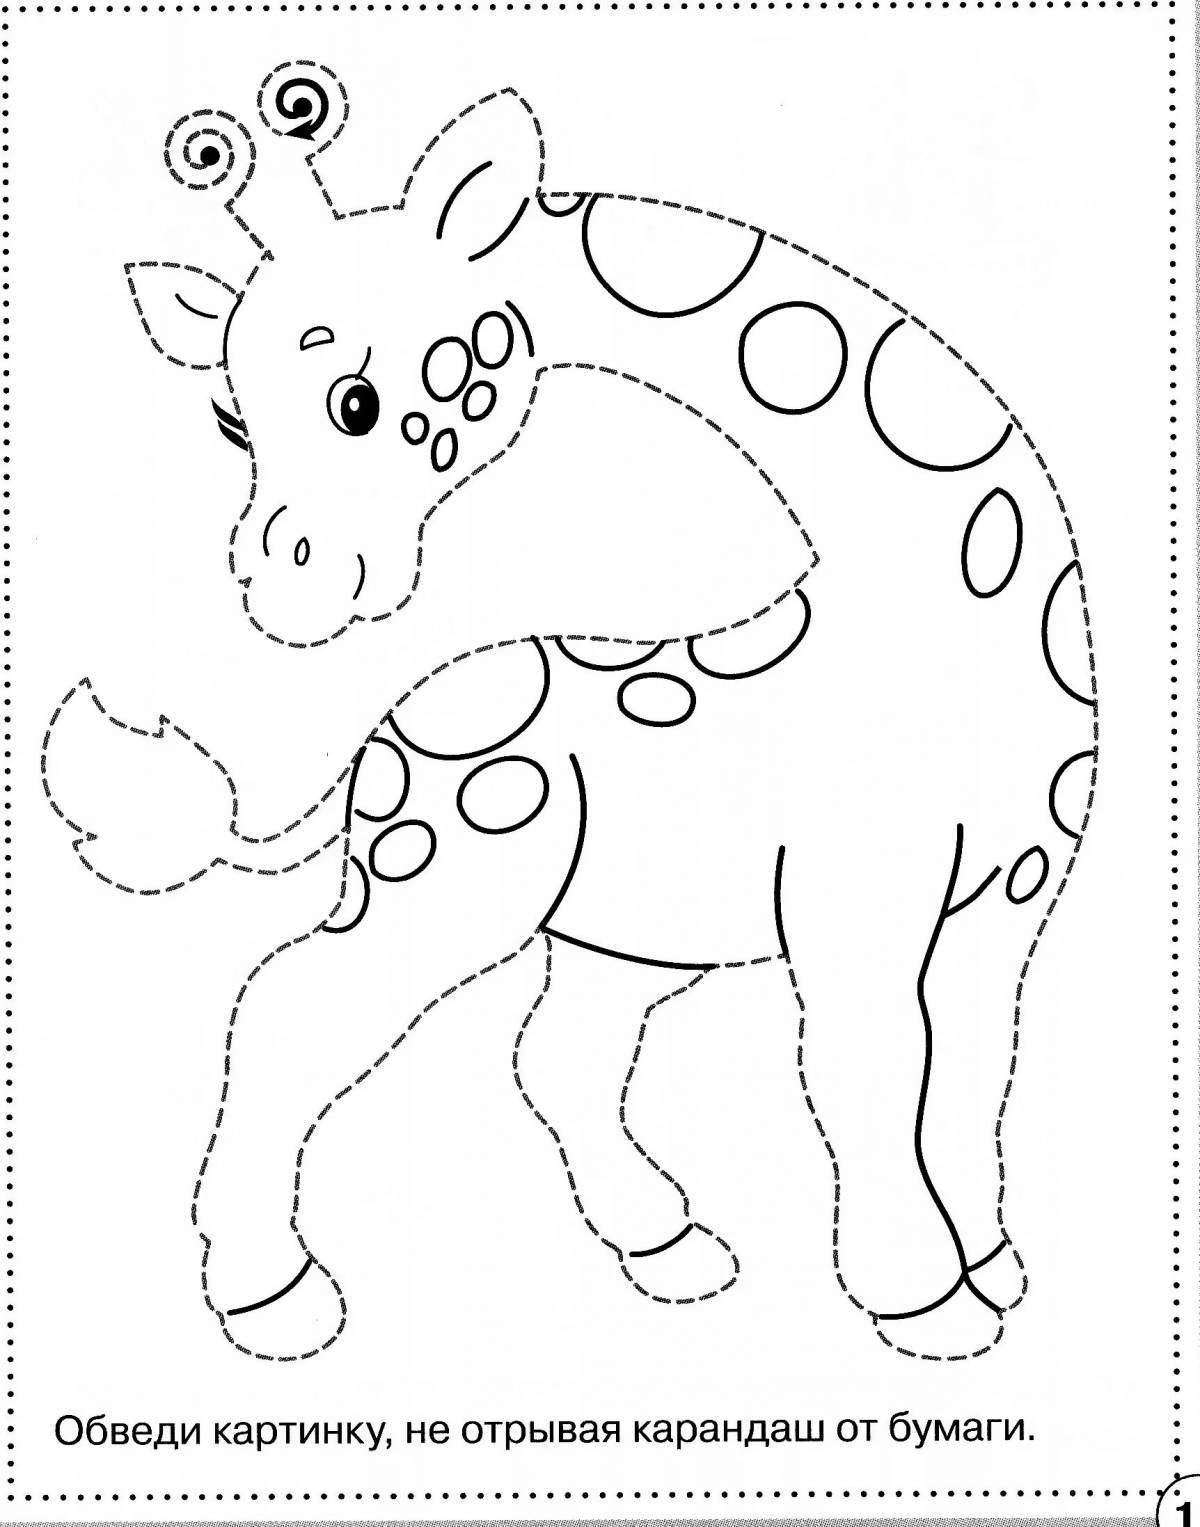 Bright coloring animals of hot countries for children 5-6 years old